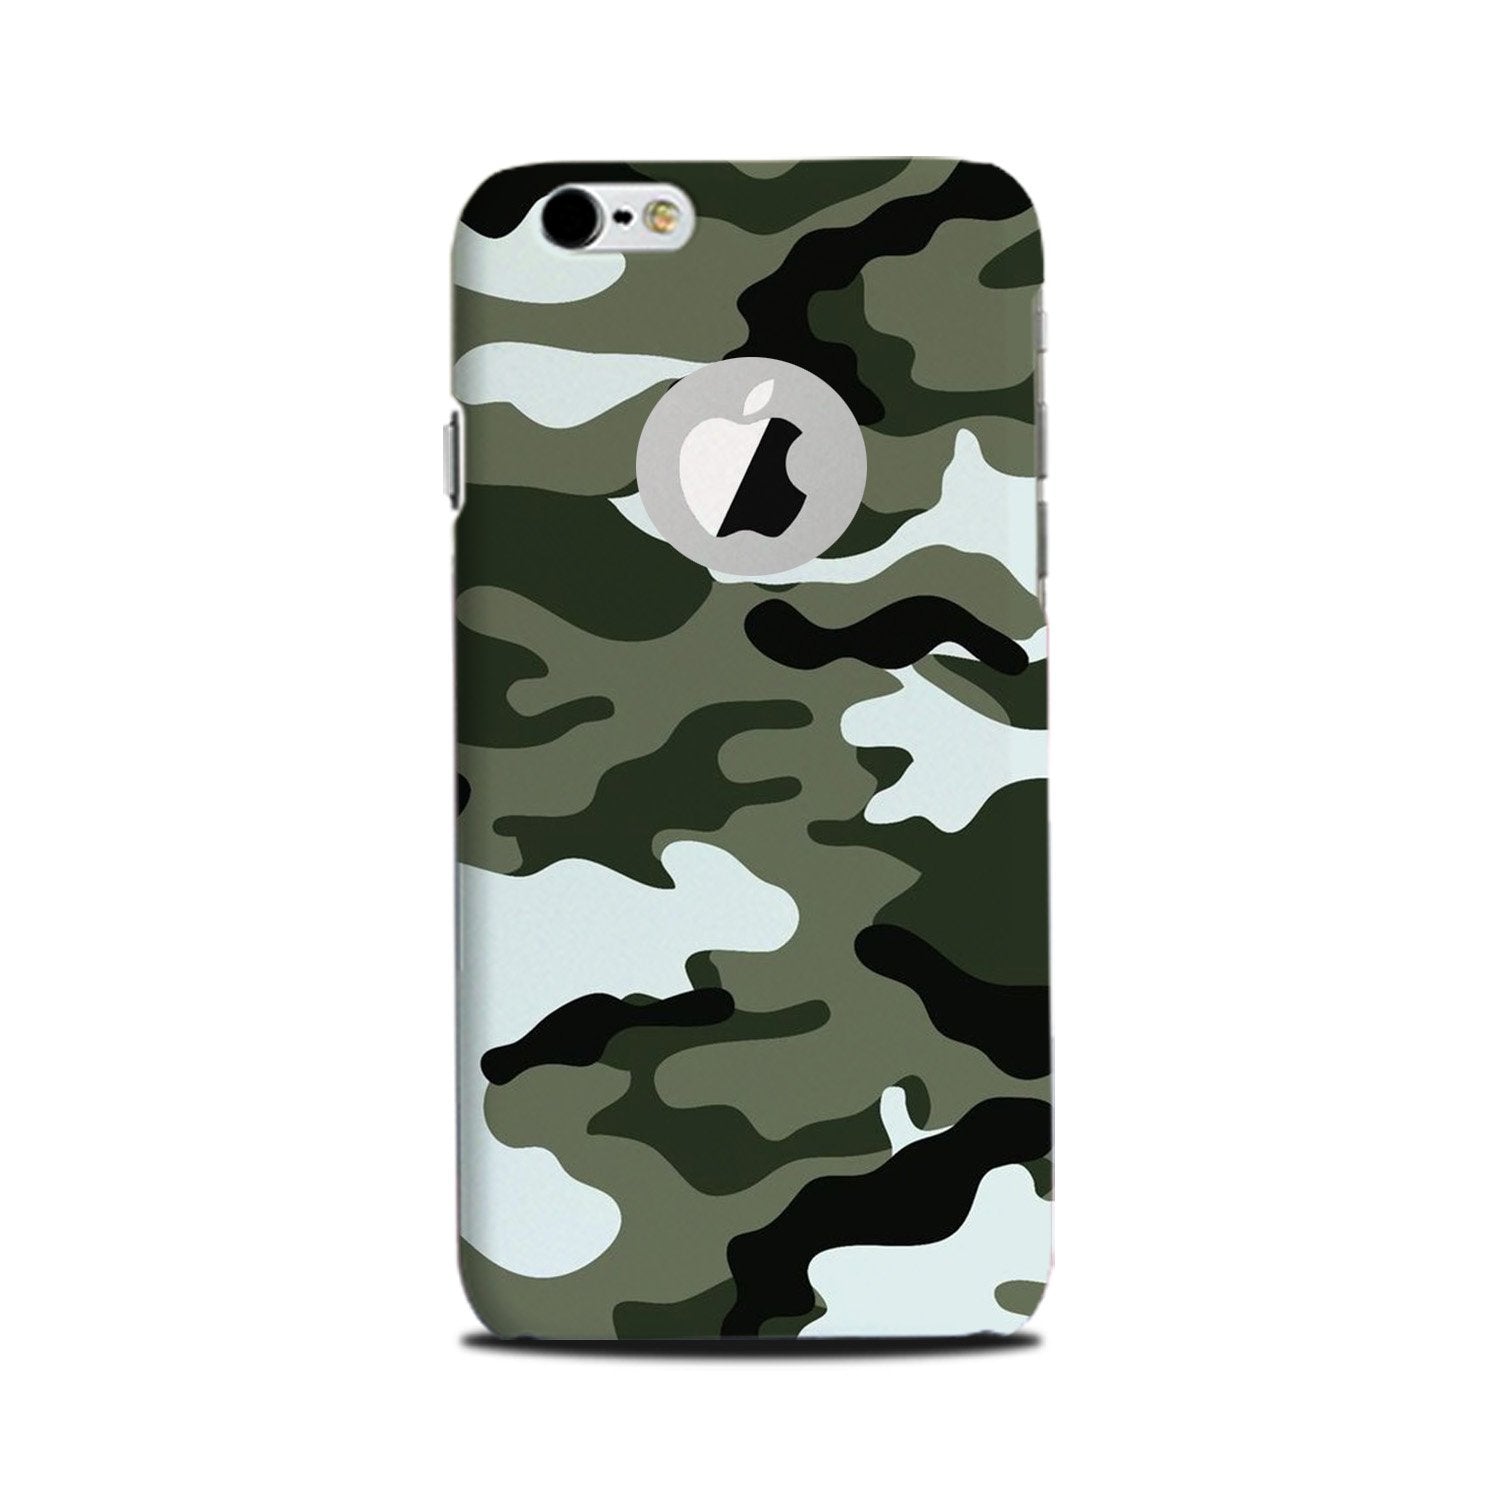 Cover for iPhone 6 / 6s Supreme Brown Camouflage Design Cover